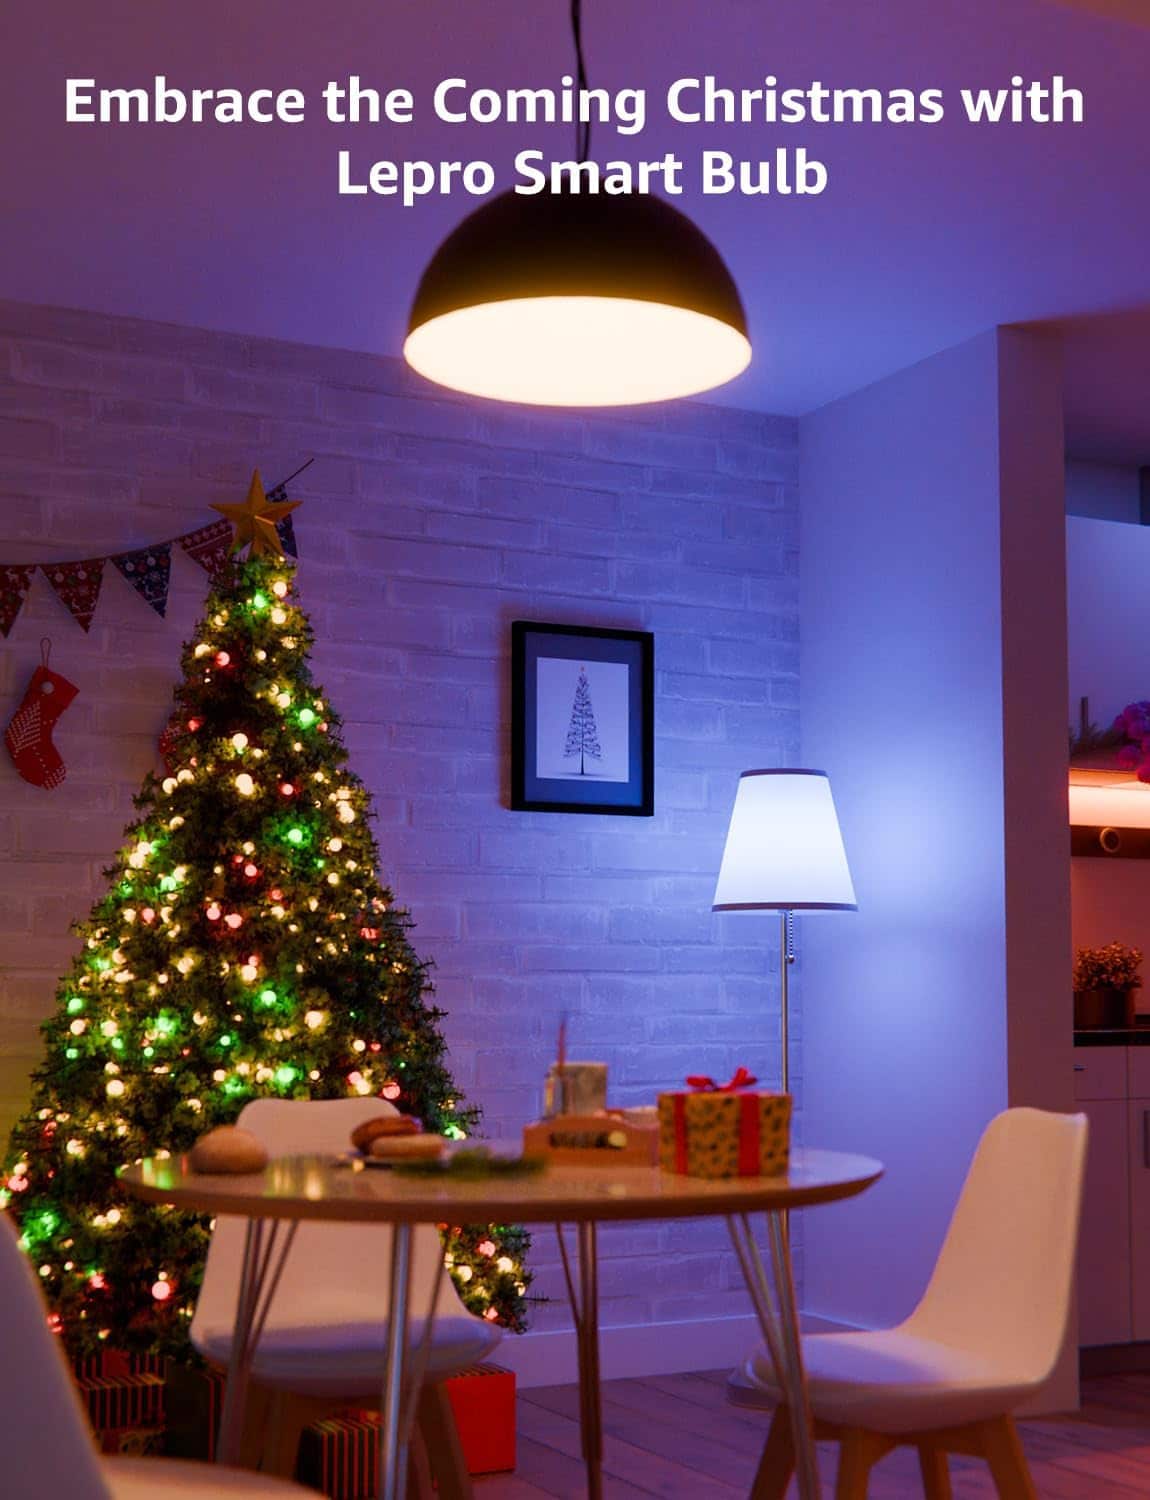 Lepro B1 Christmas Light Bulbs - Smart Mood Recognition, Music Sync, 2.4Ghz WiFi RGBWW Color Changing LED Bulb, Voice Control Via App, Work with Alexa  Google Assistant, 4 Packs